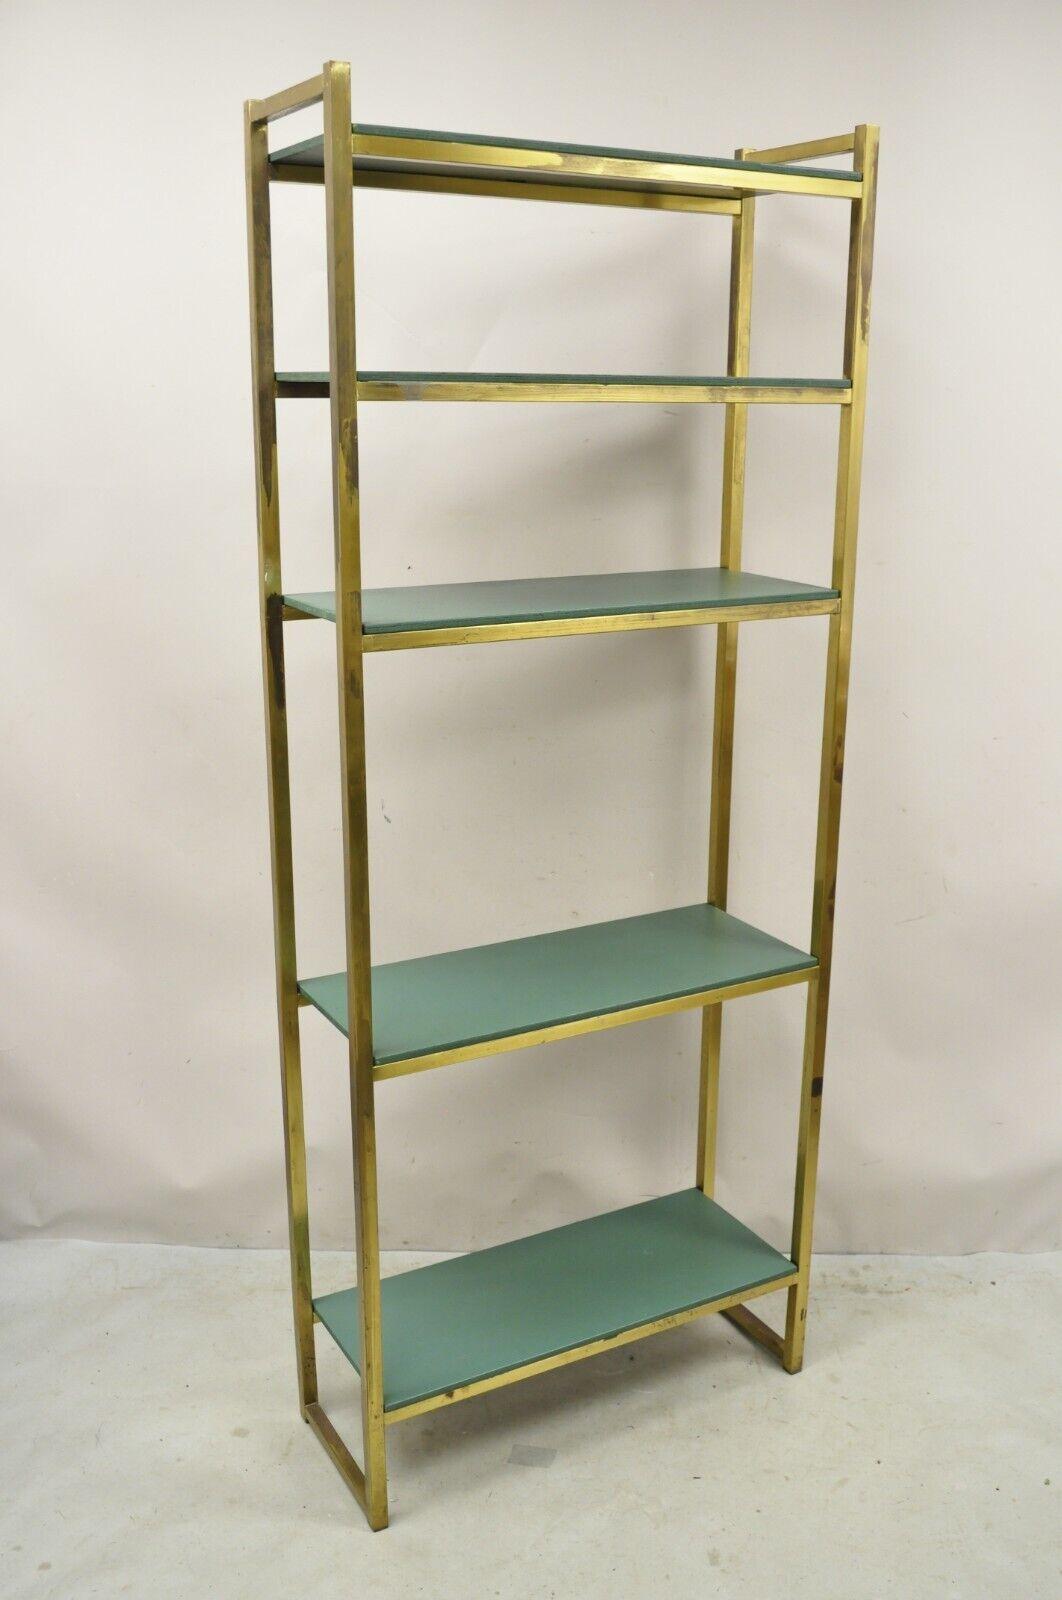 Vintage Hollywood Regency Brass Metal 5 Tier Etagere Bookcase Shelf. Item features a metal frame, distressed burnished brass finish, green wooden shelves, great style and form. Circa Late 20th Century. Measurements: 79